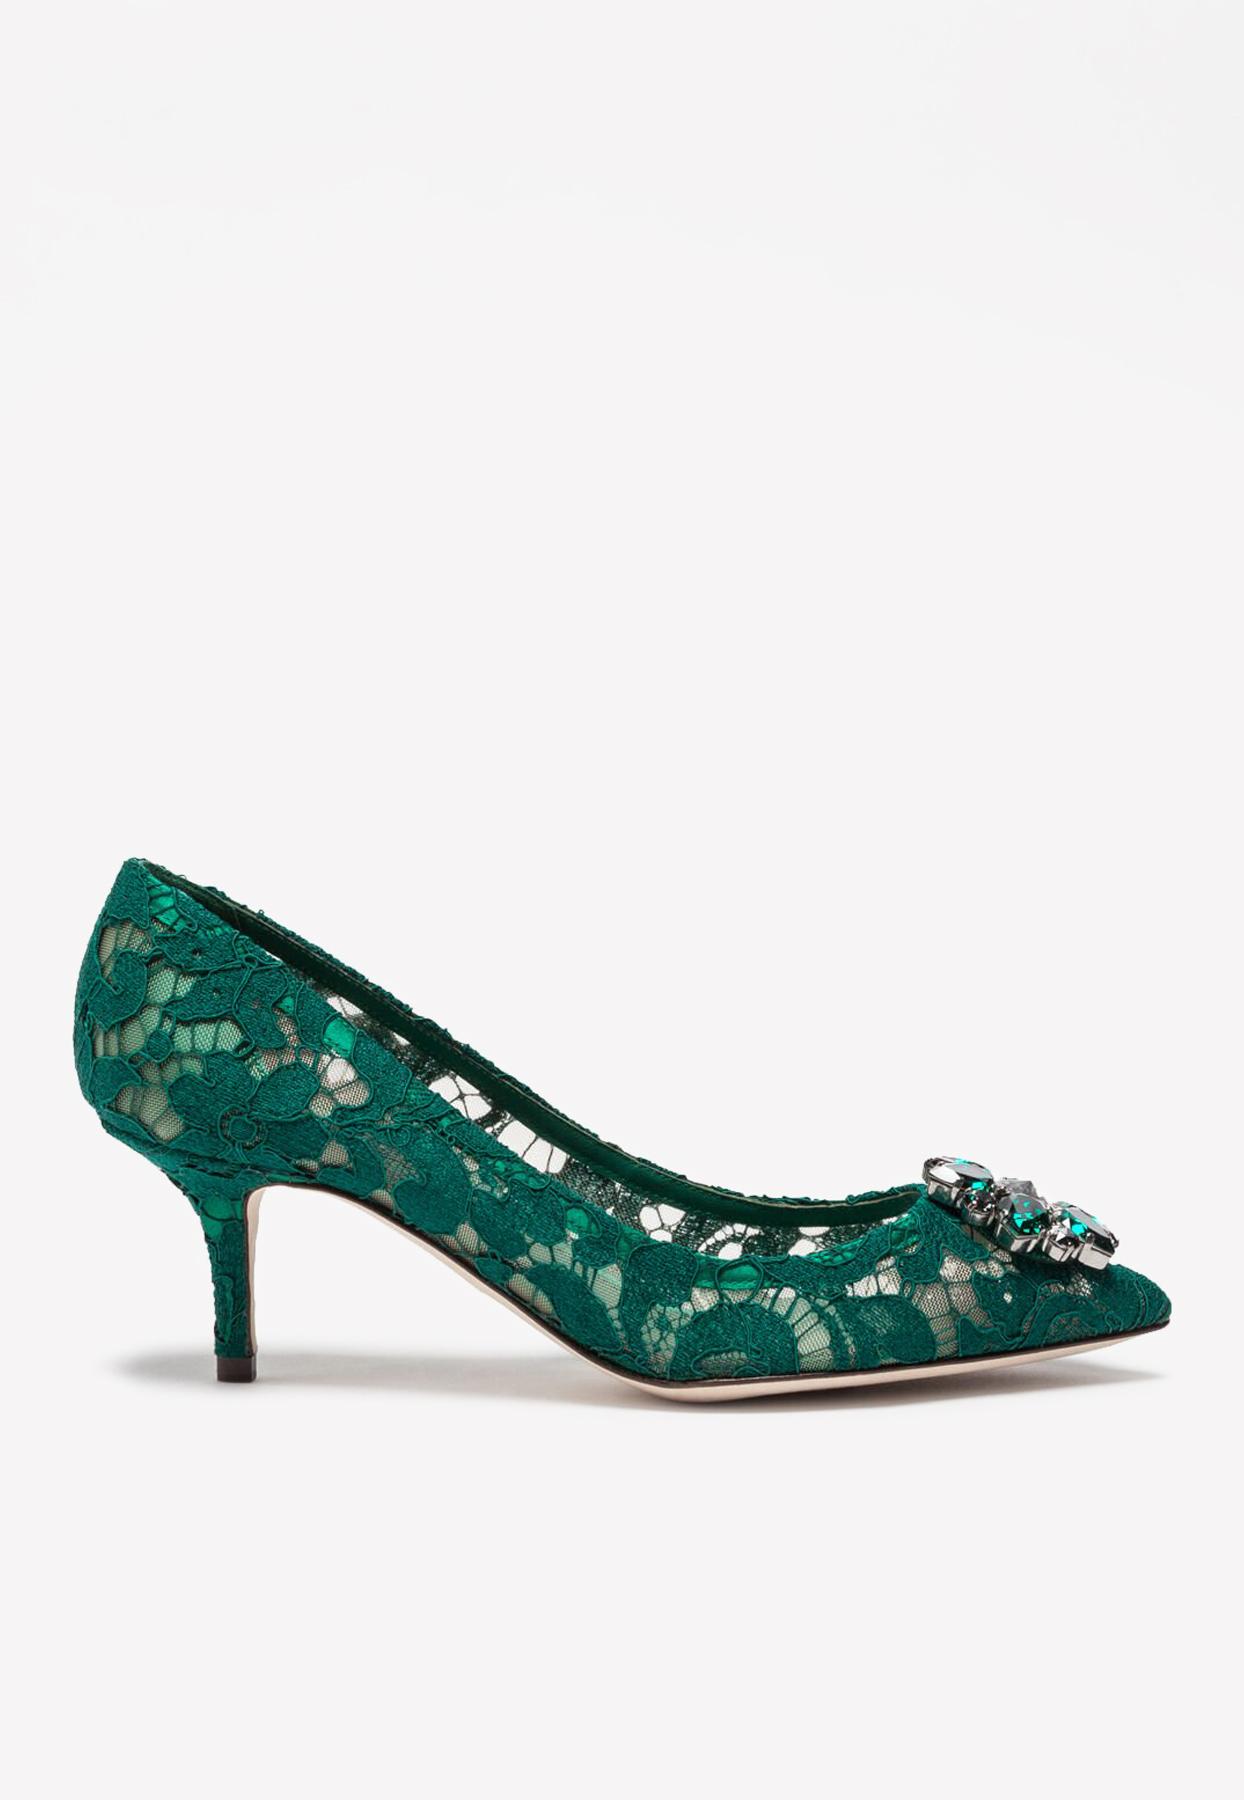 Dolce & Gabbana Lace Rainbow Pumps With Brooch Detailing in Green | Lyst